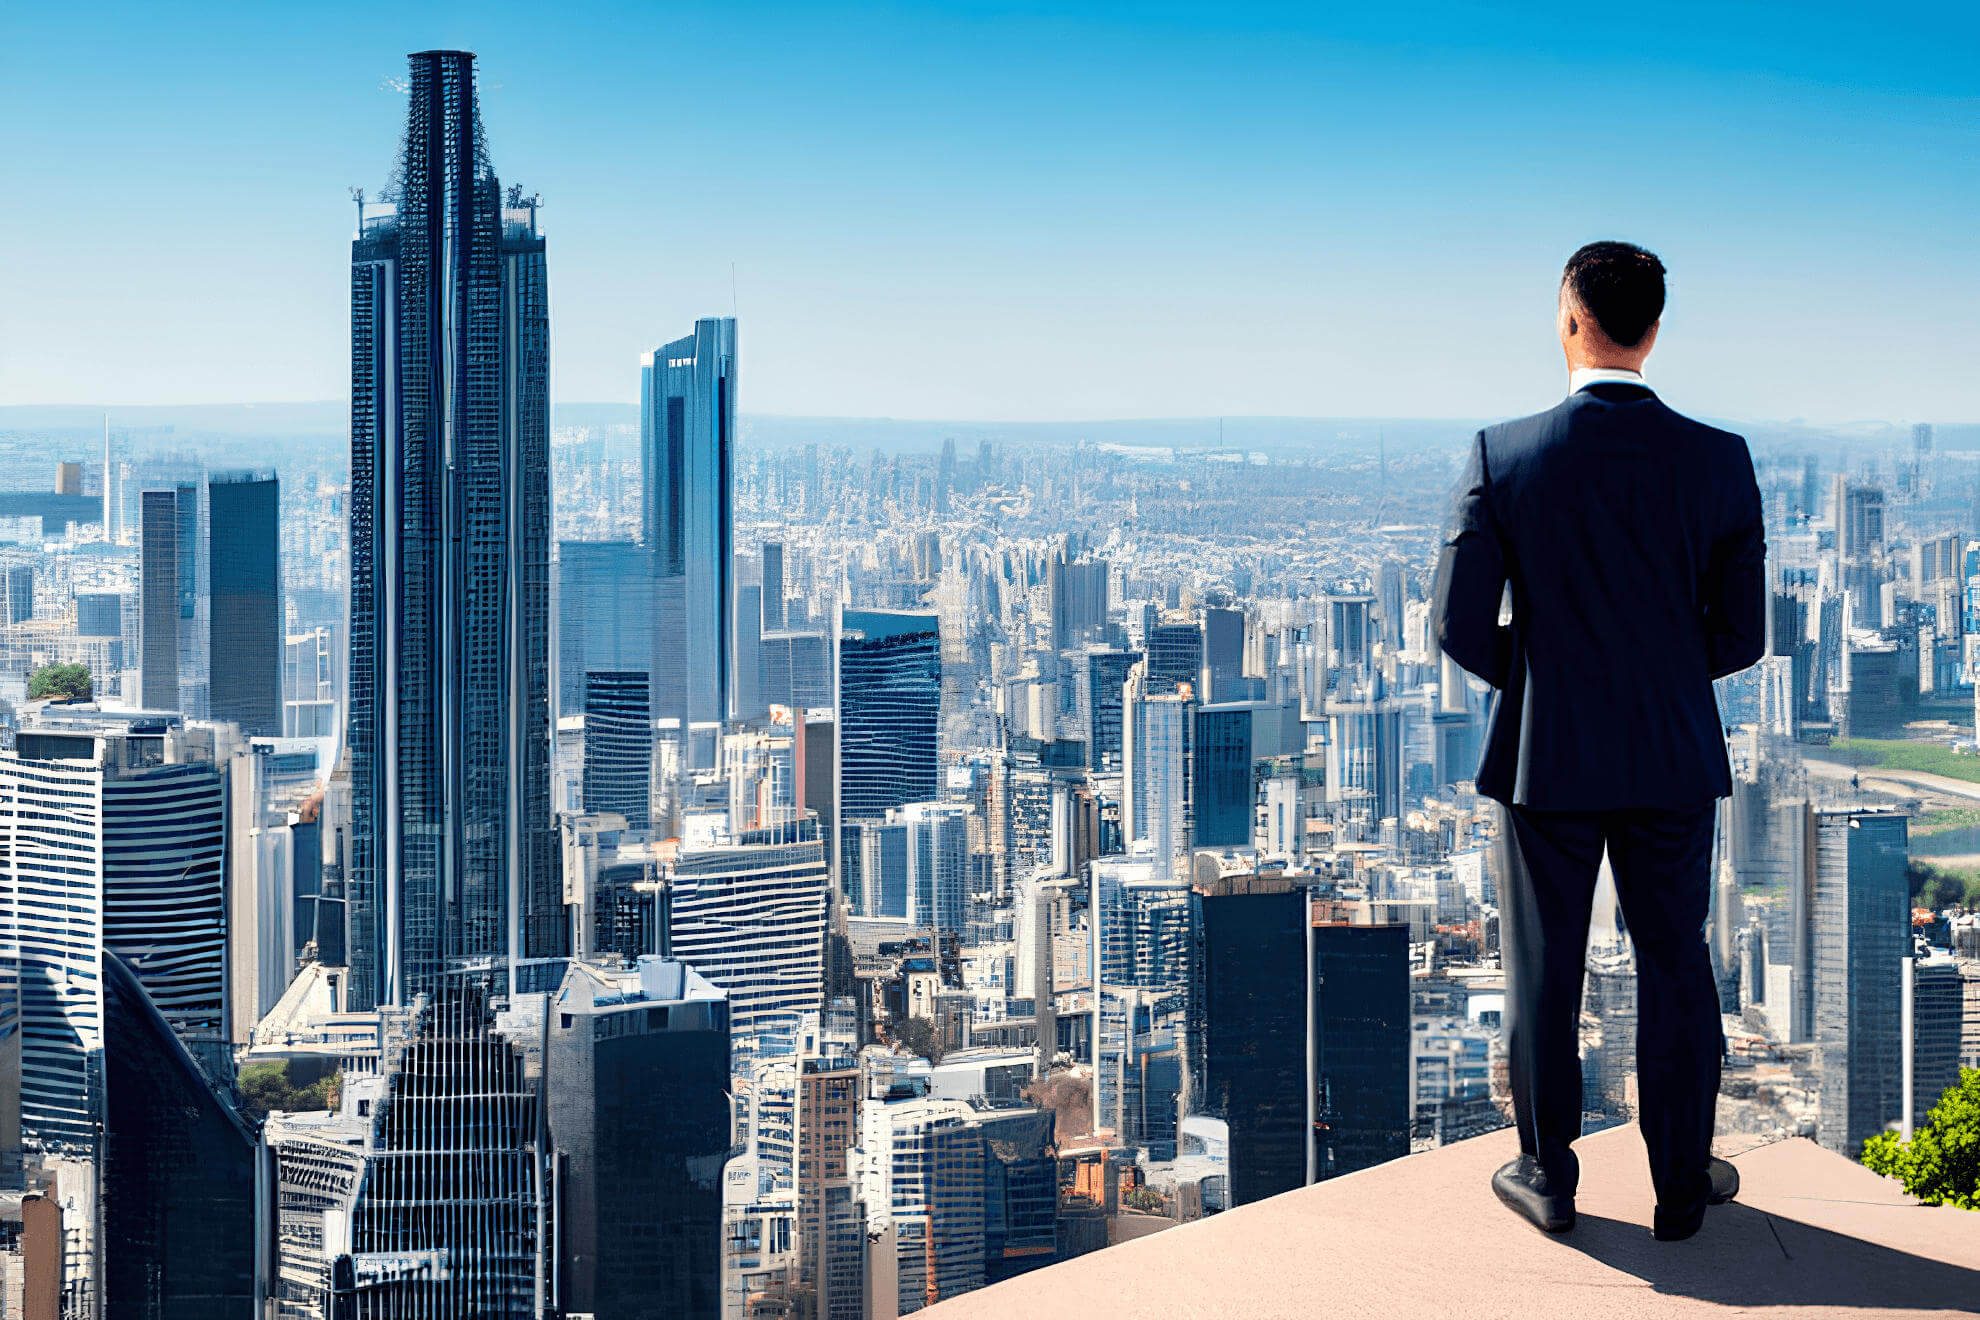 business-owner-happy-standing-on-a-tall-building-in-a-city-overlooking-a-big-city-with-skyscrapers